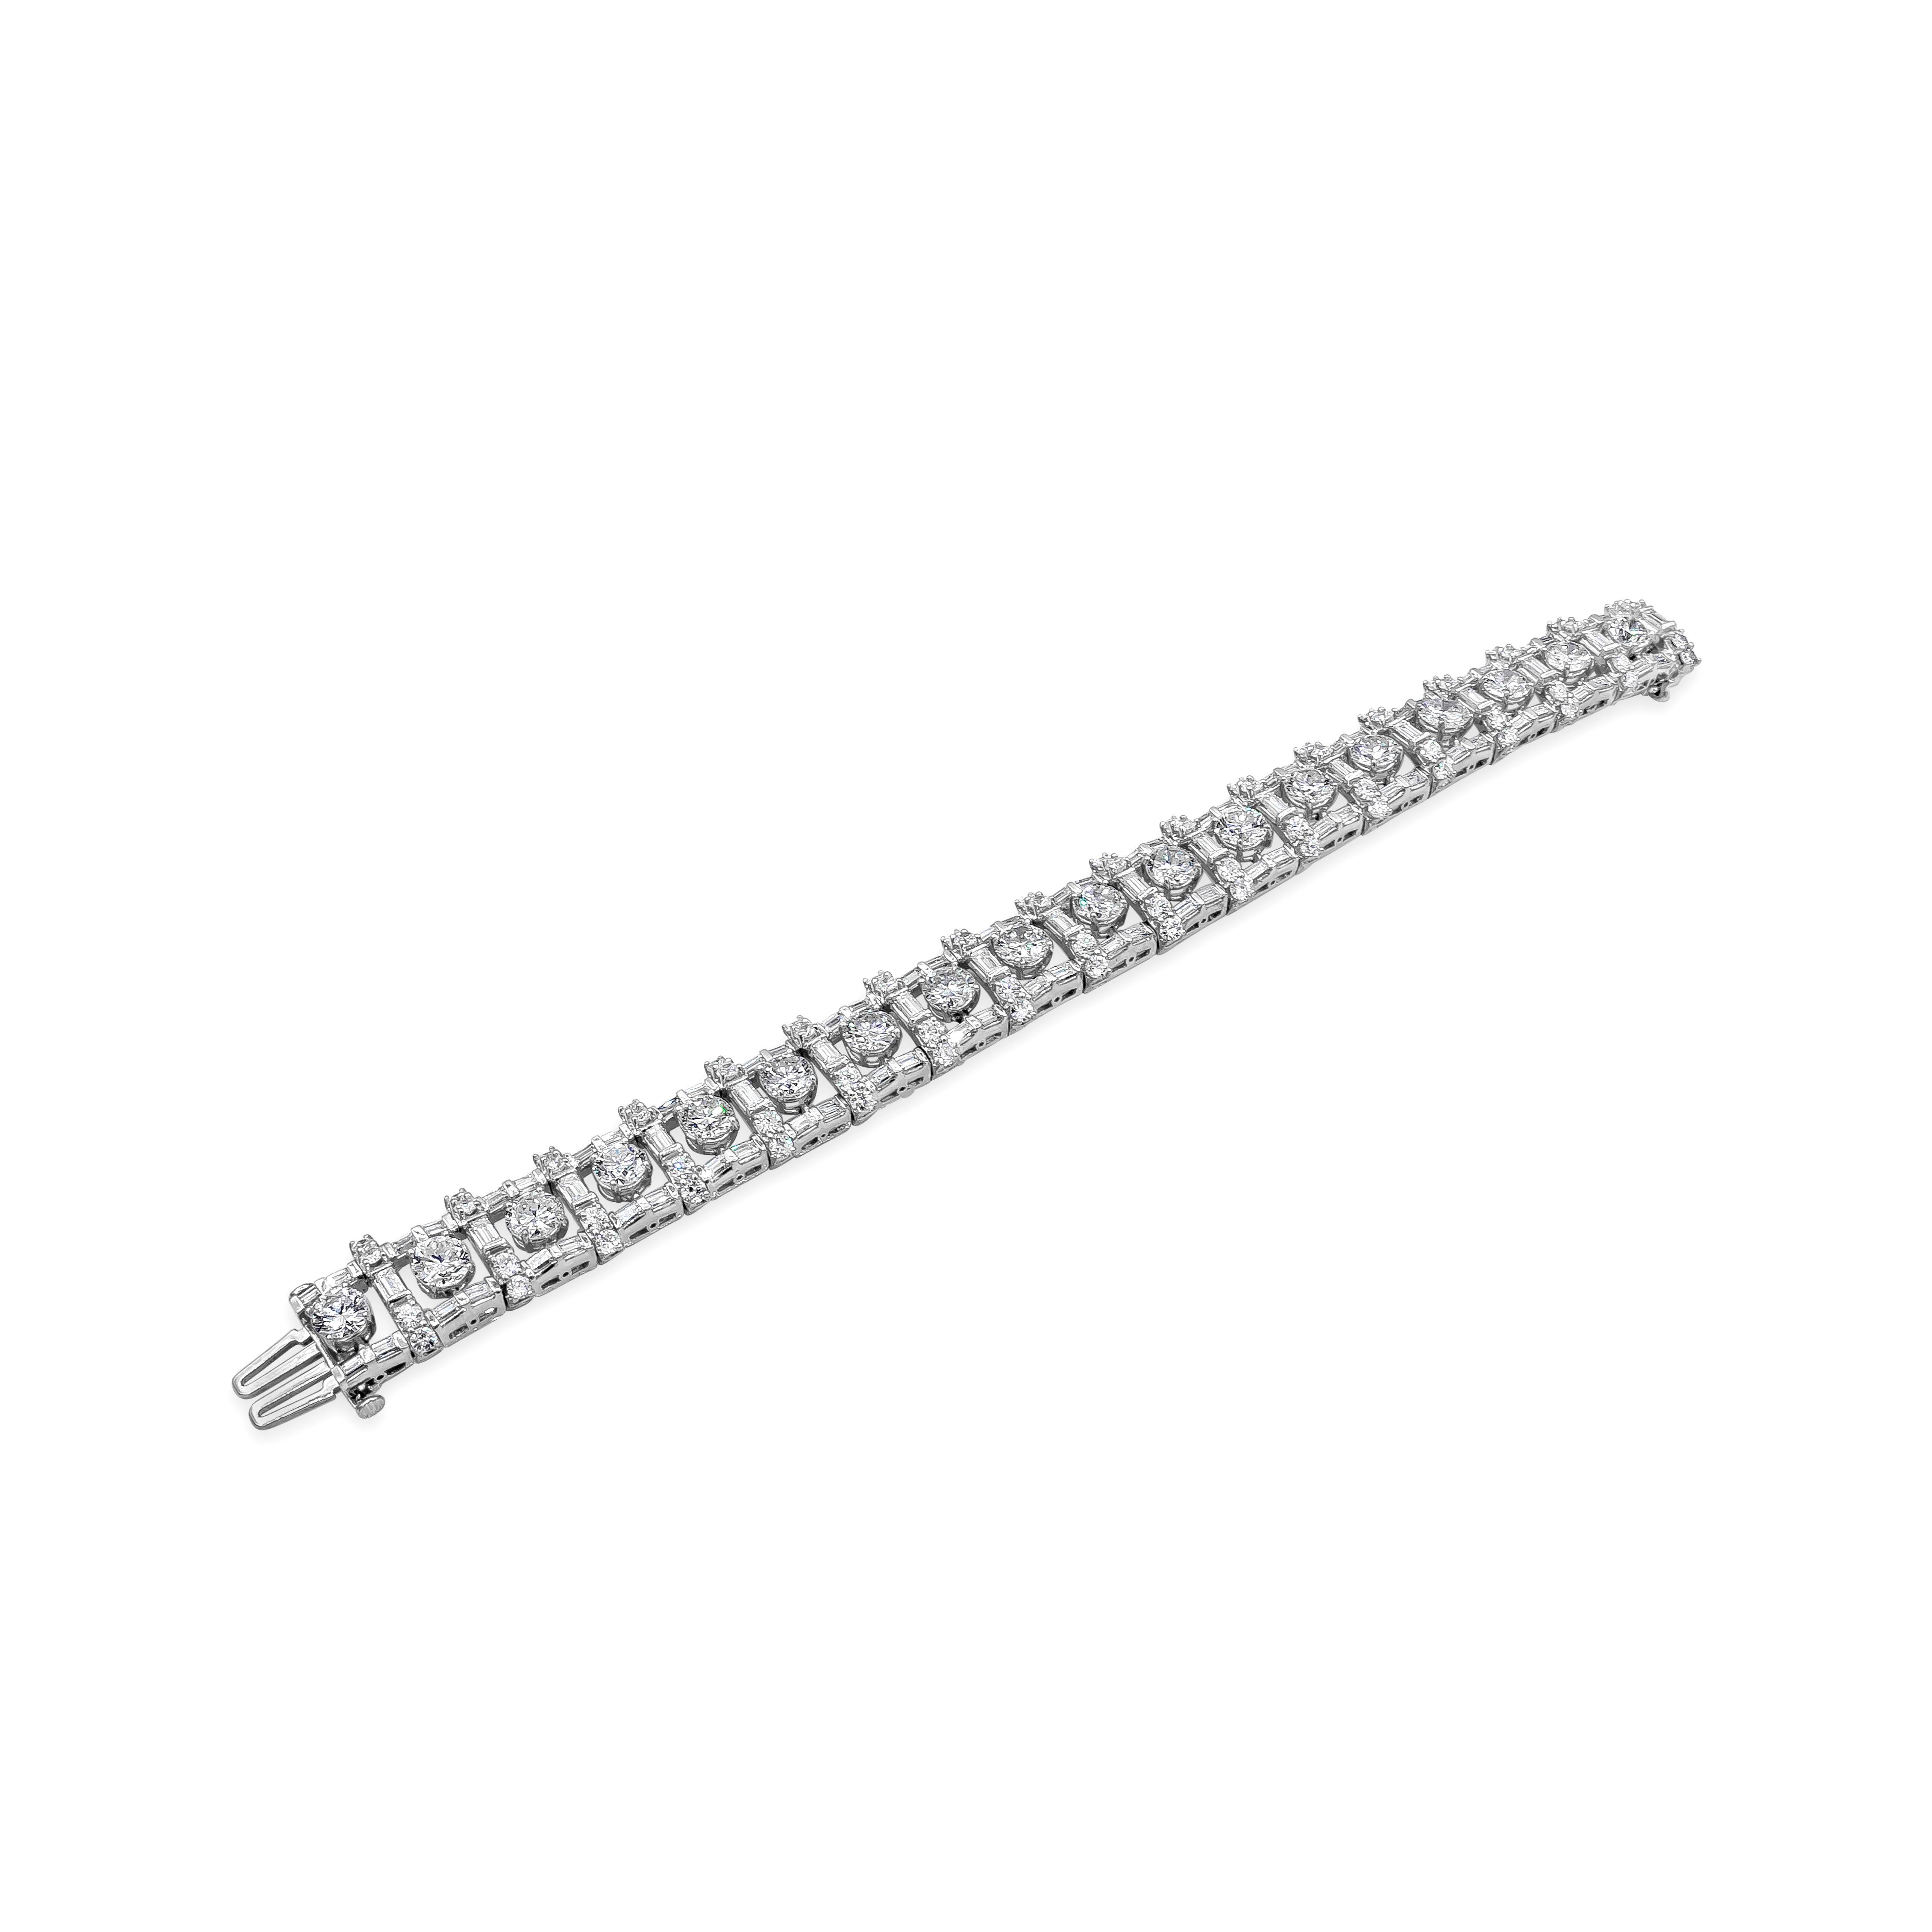 Open work diamond bracelet showcasing 180 pieces mixed diamonds finely made in platinum. Brilliant round diamonds weighs 12.50 carats total, G color and VS-SI in clarity. Baguette and round cut weighs 6.50 carats total and 5 carats total